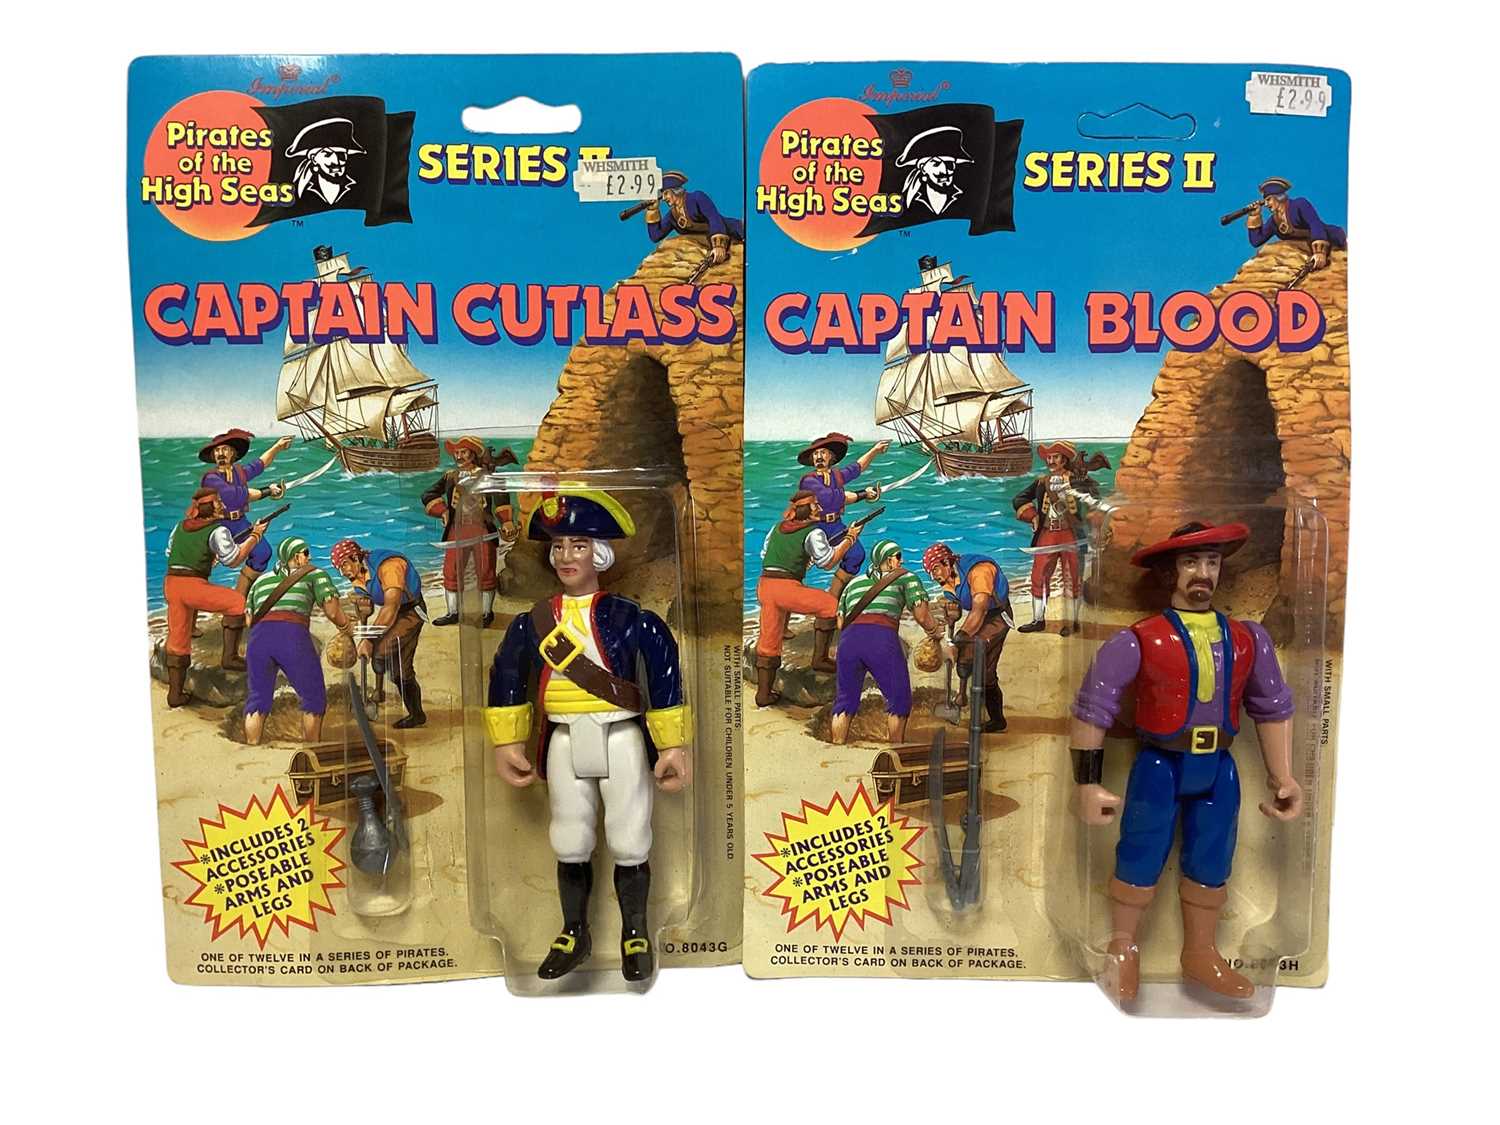 Imperial Series II Pirates of the High Seas including Captain Blood No.8043H, Captain Cutlass No.804